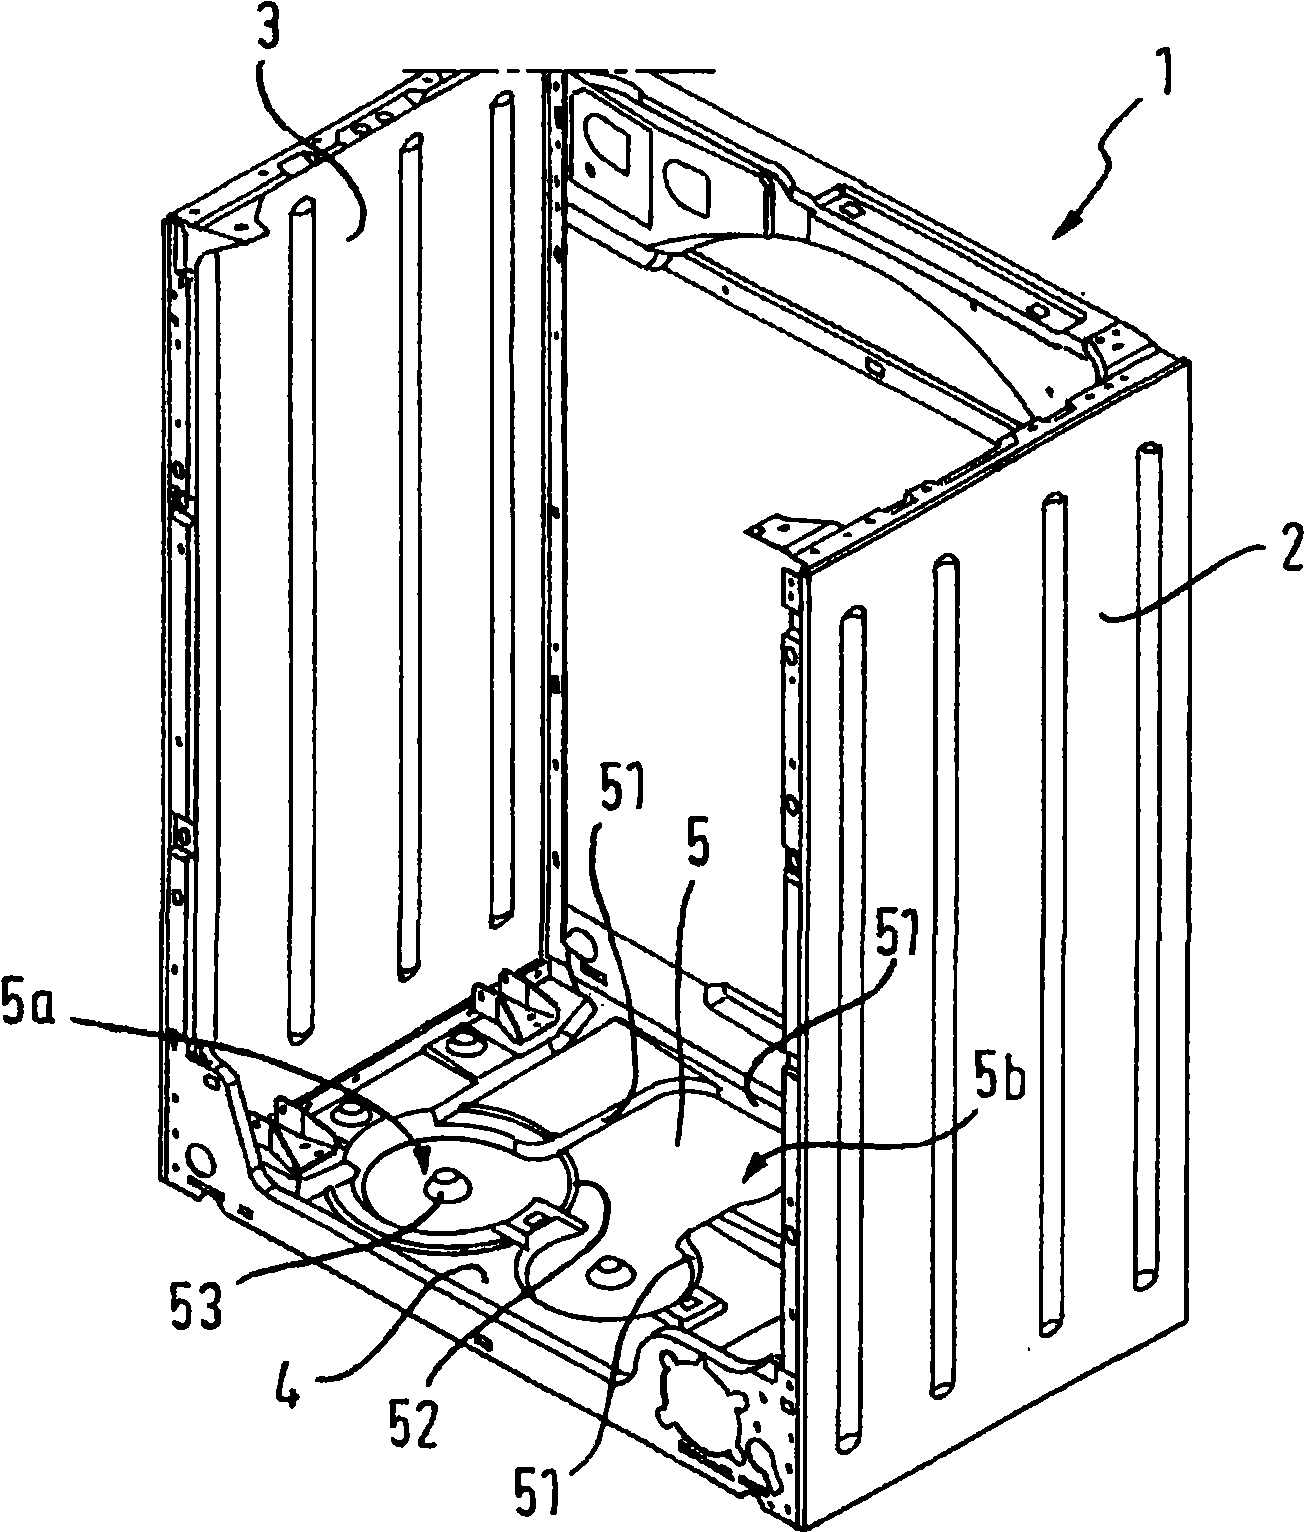 Household appliance having a collecting apparatus for leakage water